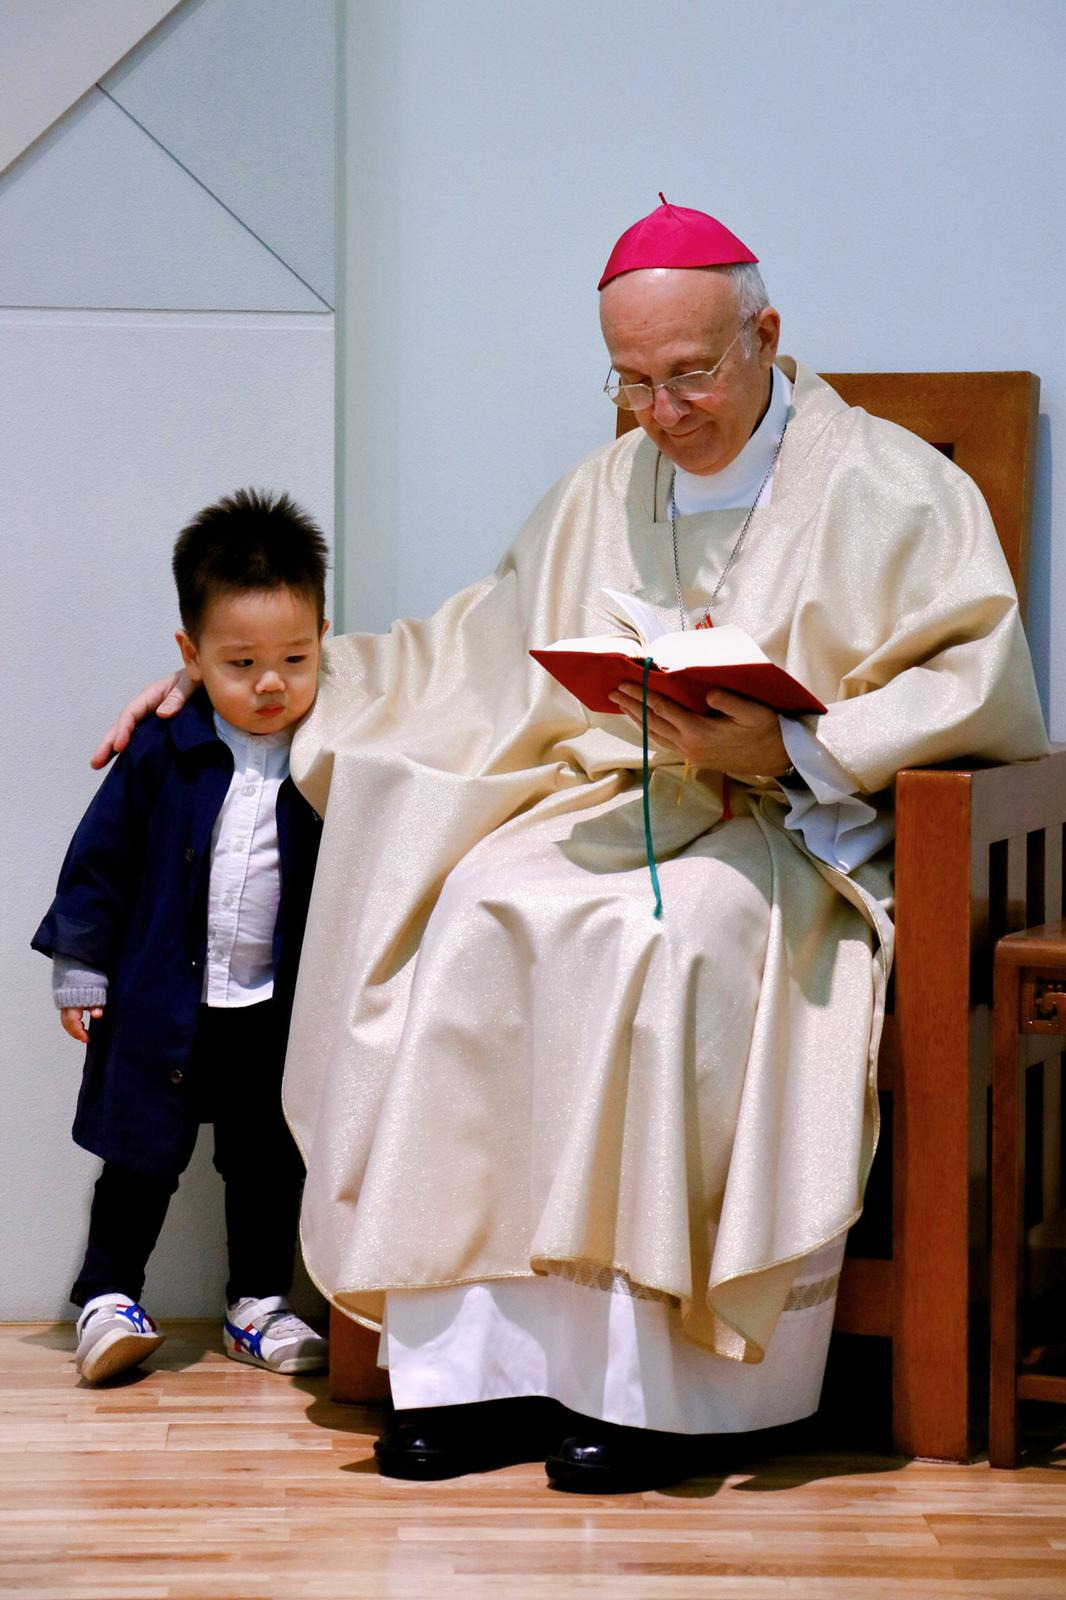 Alfred Xuereb (right), Vatican Ambassador to Korea, is photographed with a baptized Korean child named Little Joseph. (Vatican Embassy in Korea)